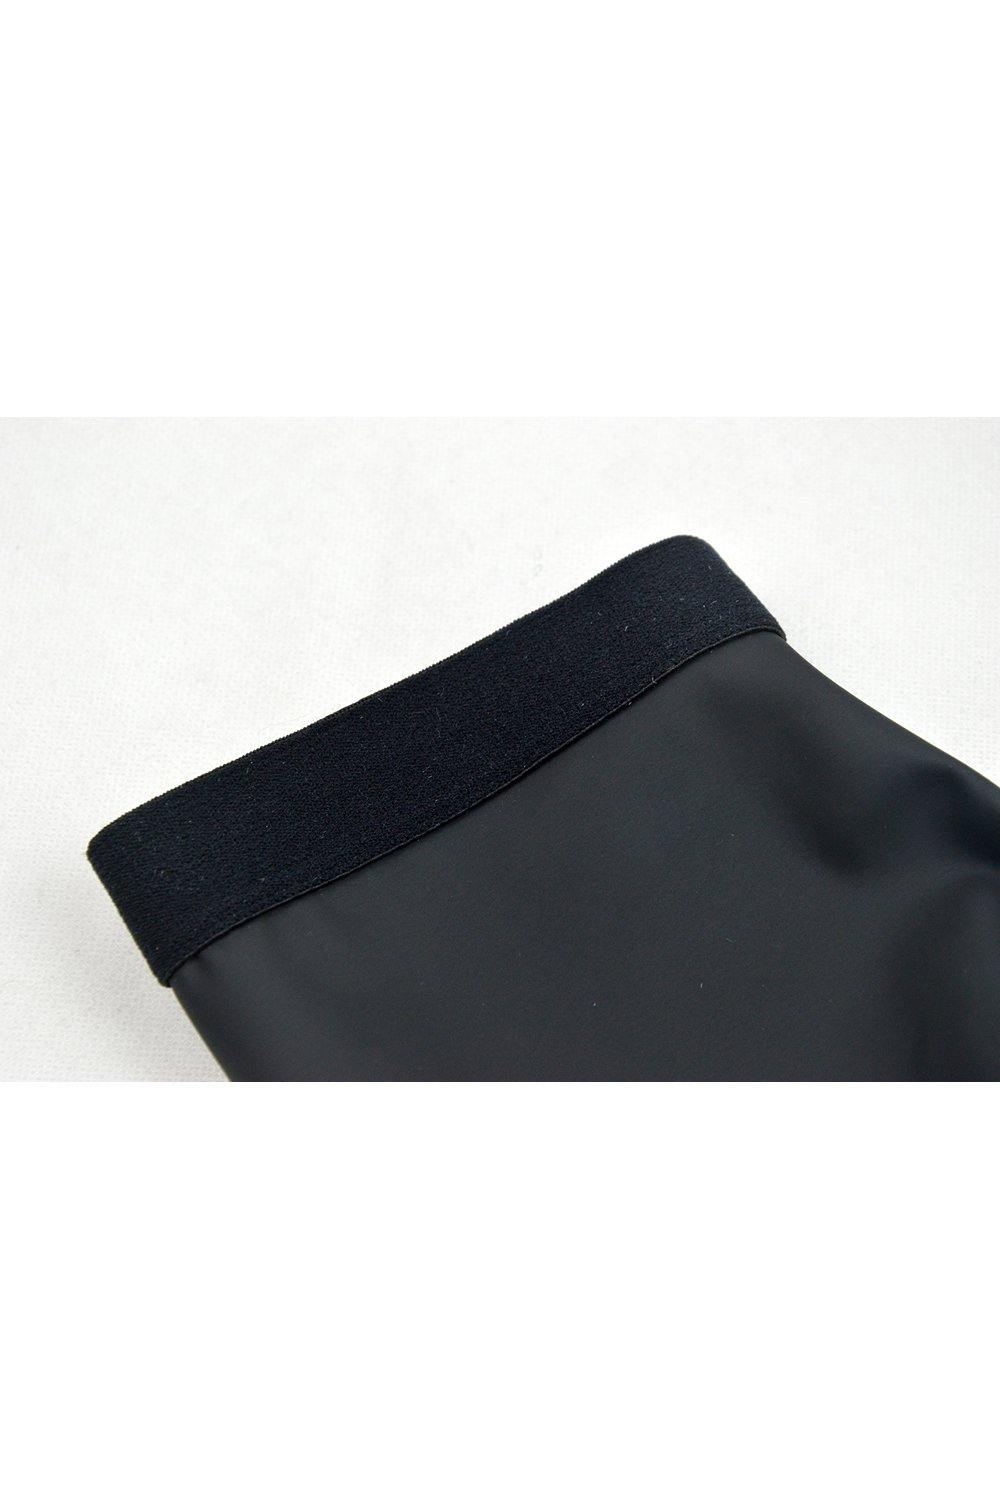 Sundried Cycling Overshoes Cover Activewear